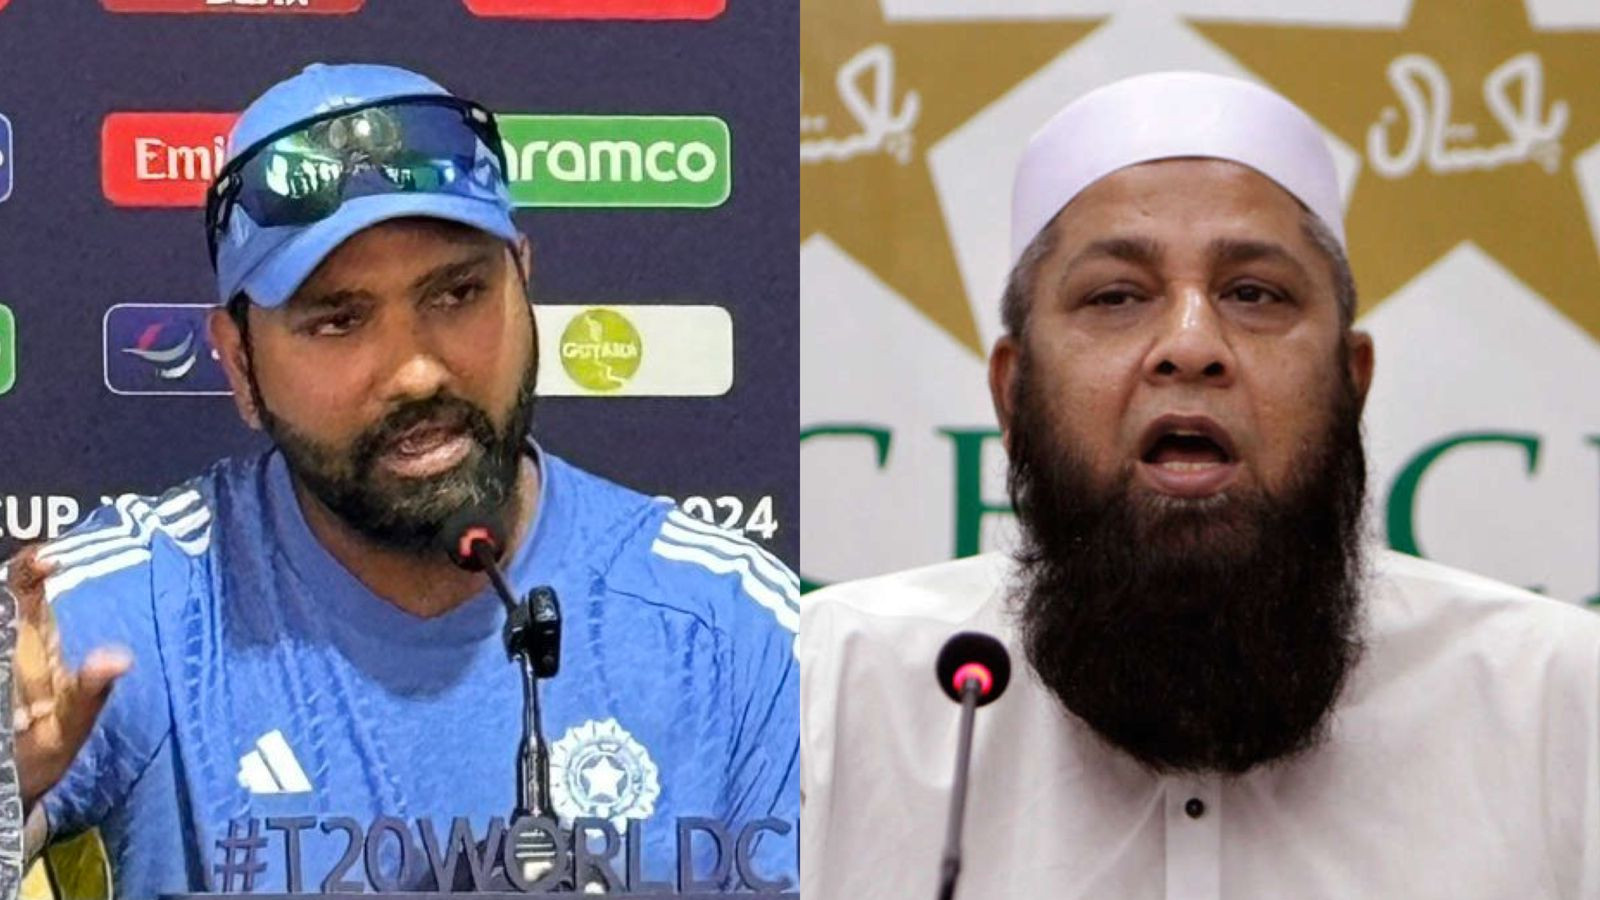 WATCH: ‘Sometimes, it's important to open your mind’ Rohit Sharma dismisses Inzamam-ul-Haq's ball tampering allegations